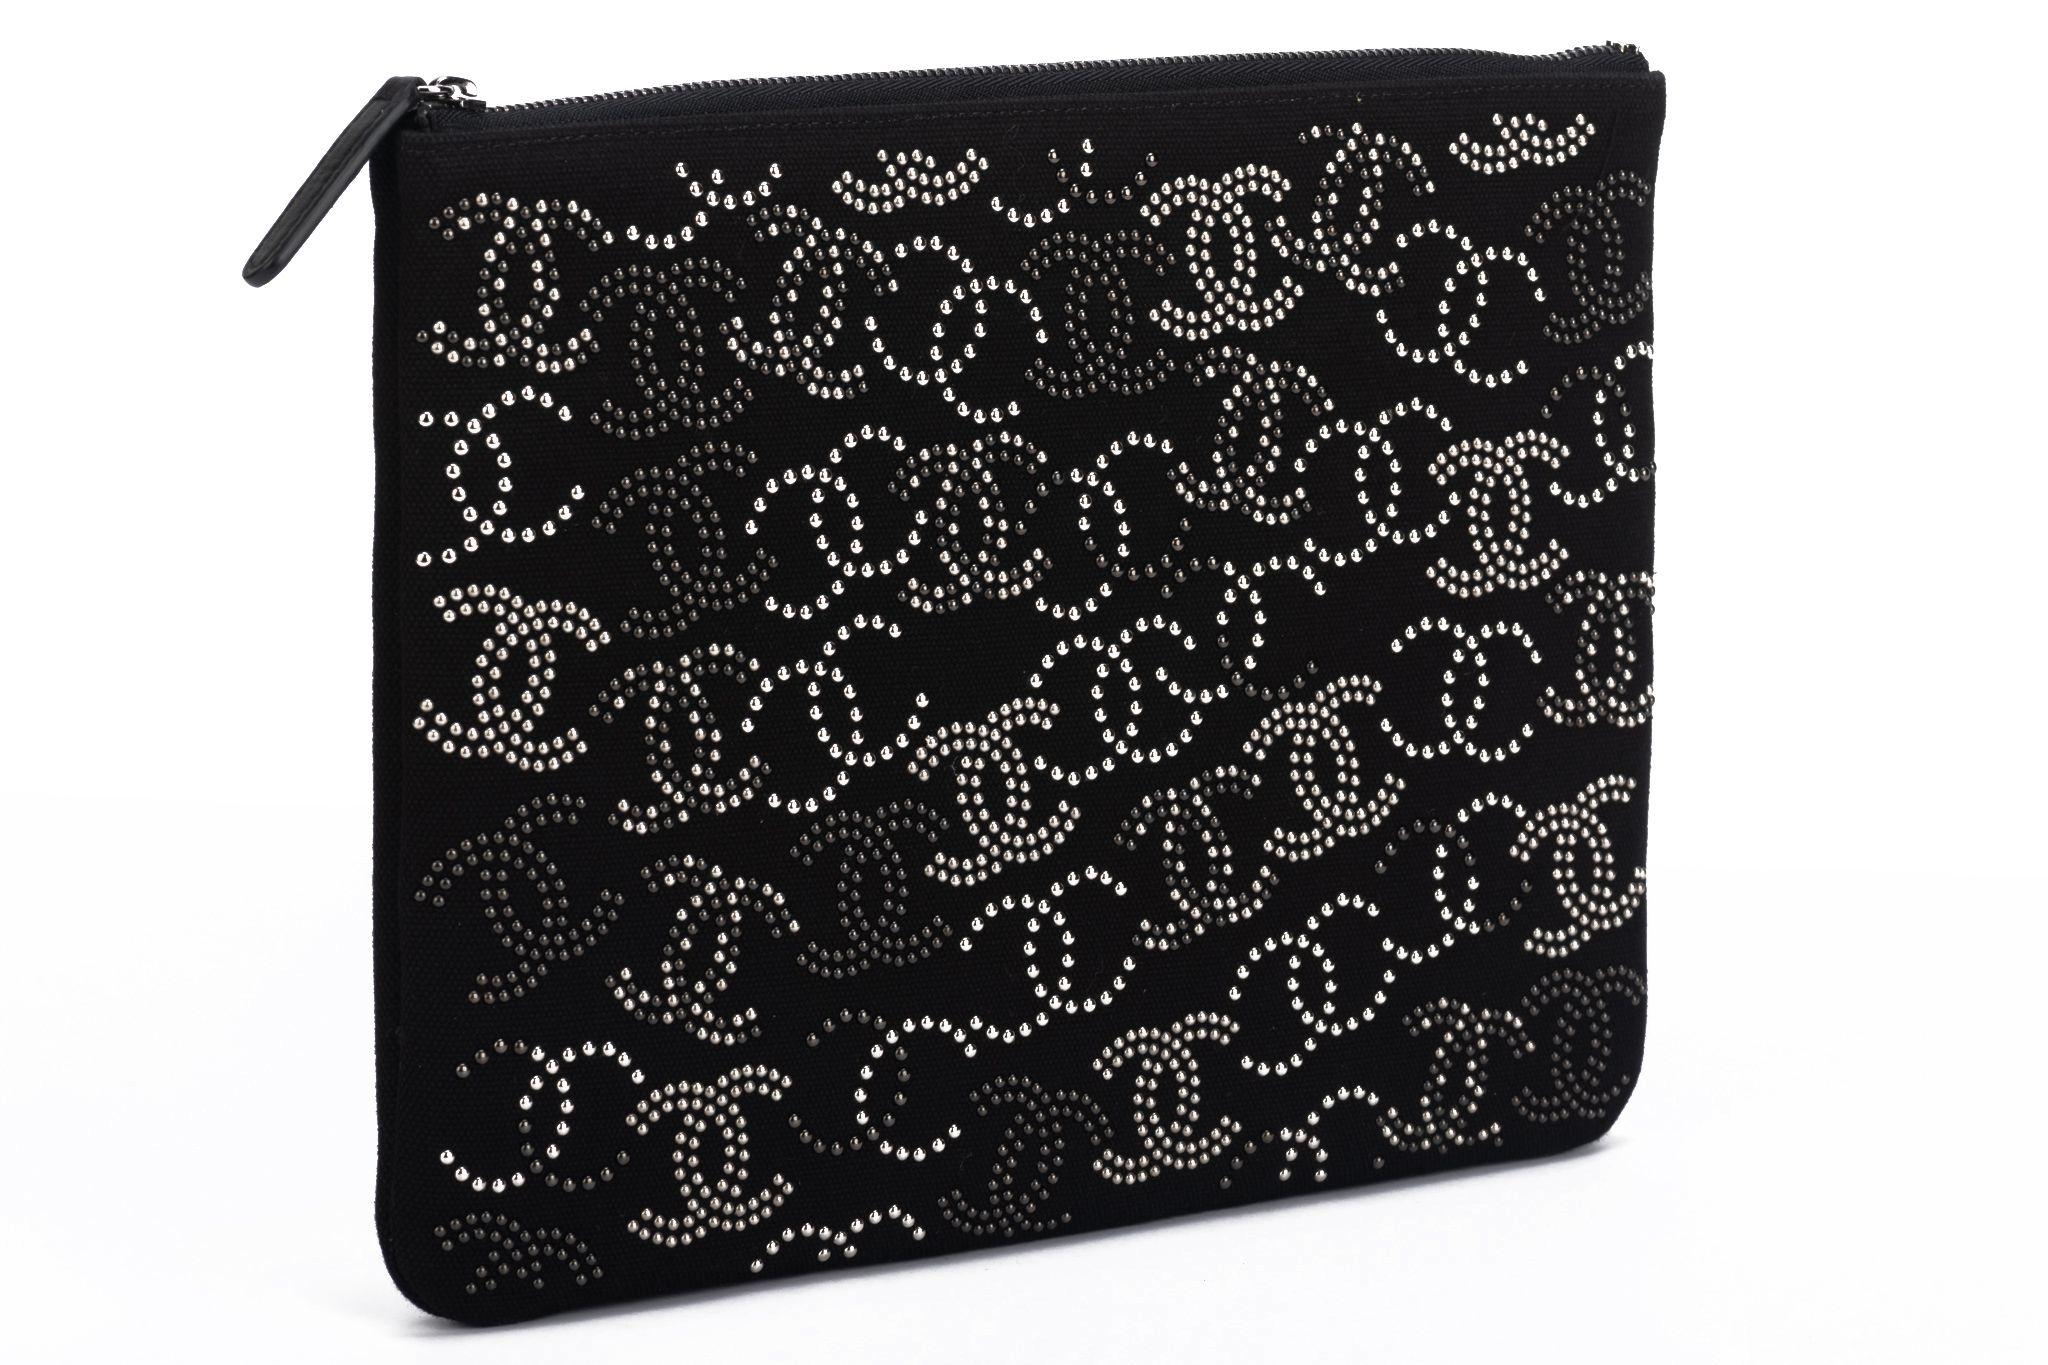 Chanel new black fabric clutch with multiple studded cc logos. Collection 27. Comes with hologram, ID card , original dust over and box.
